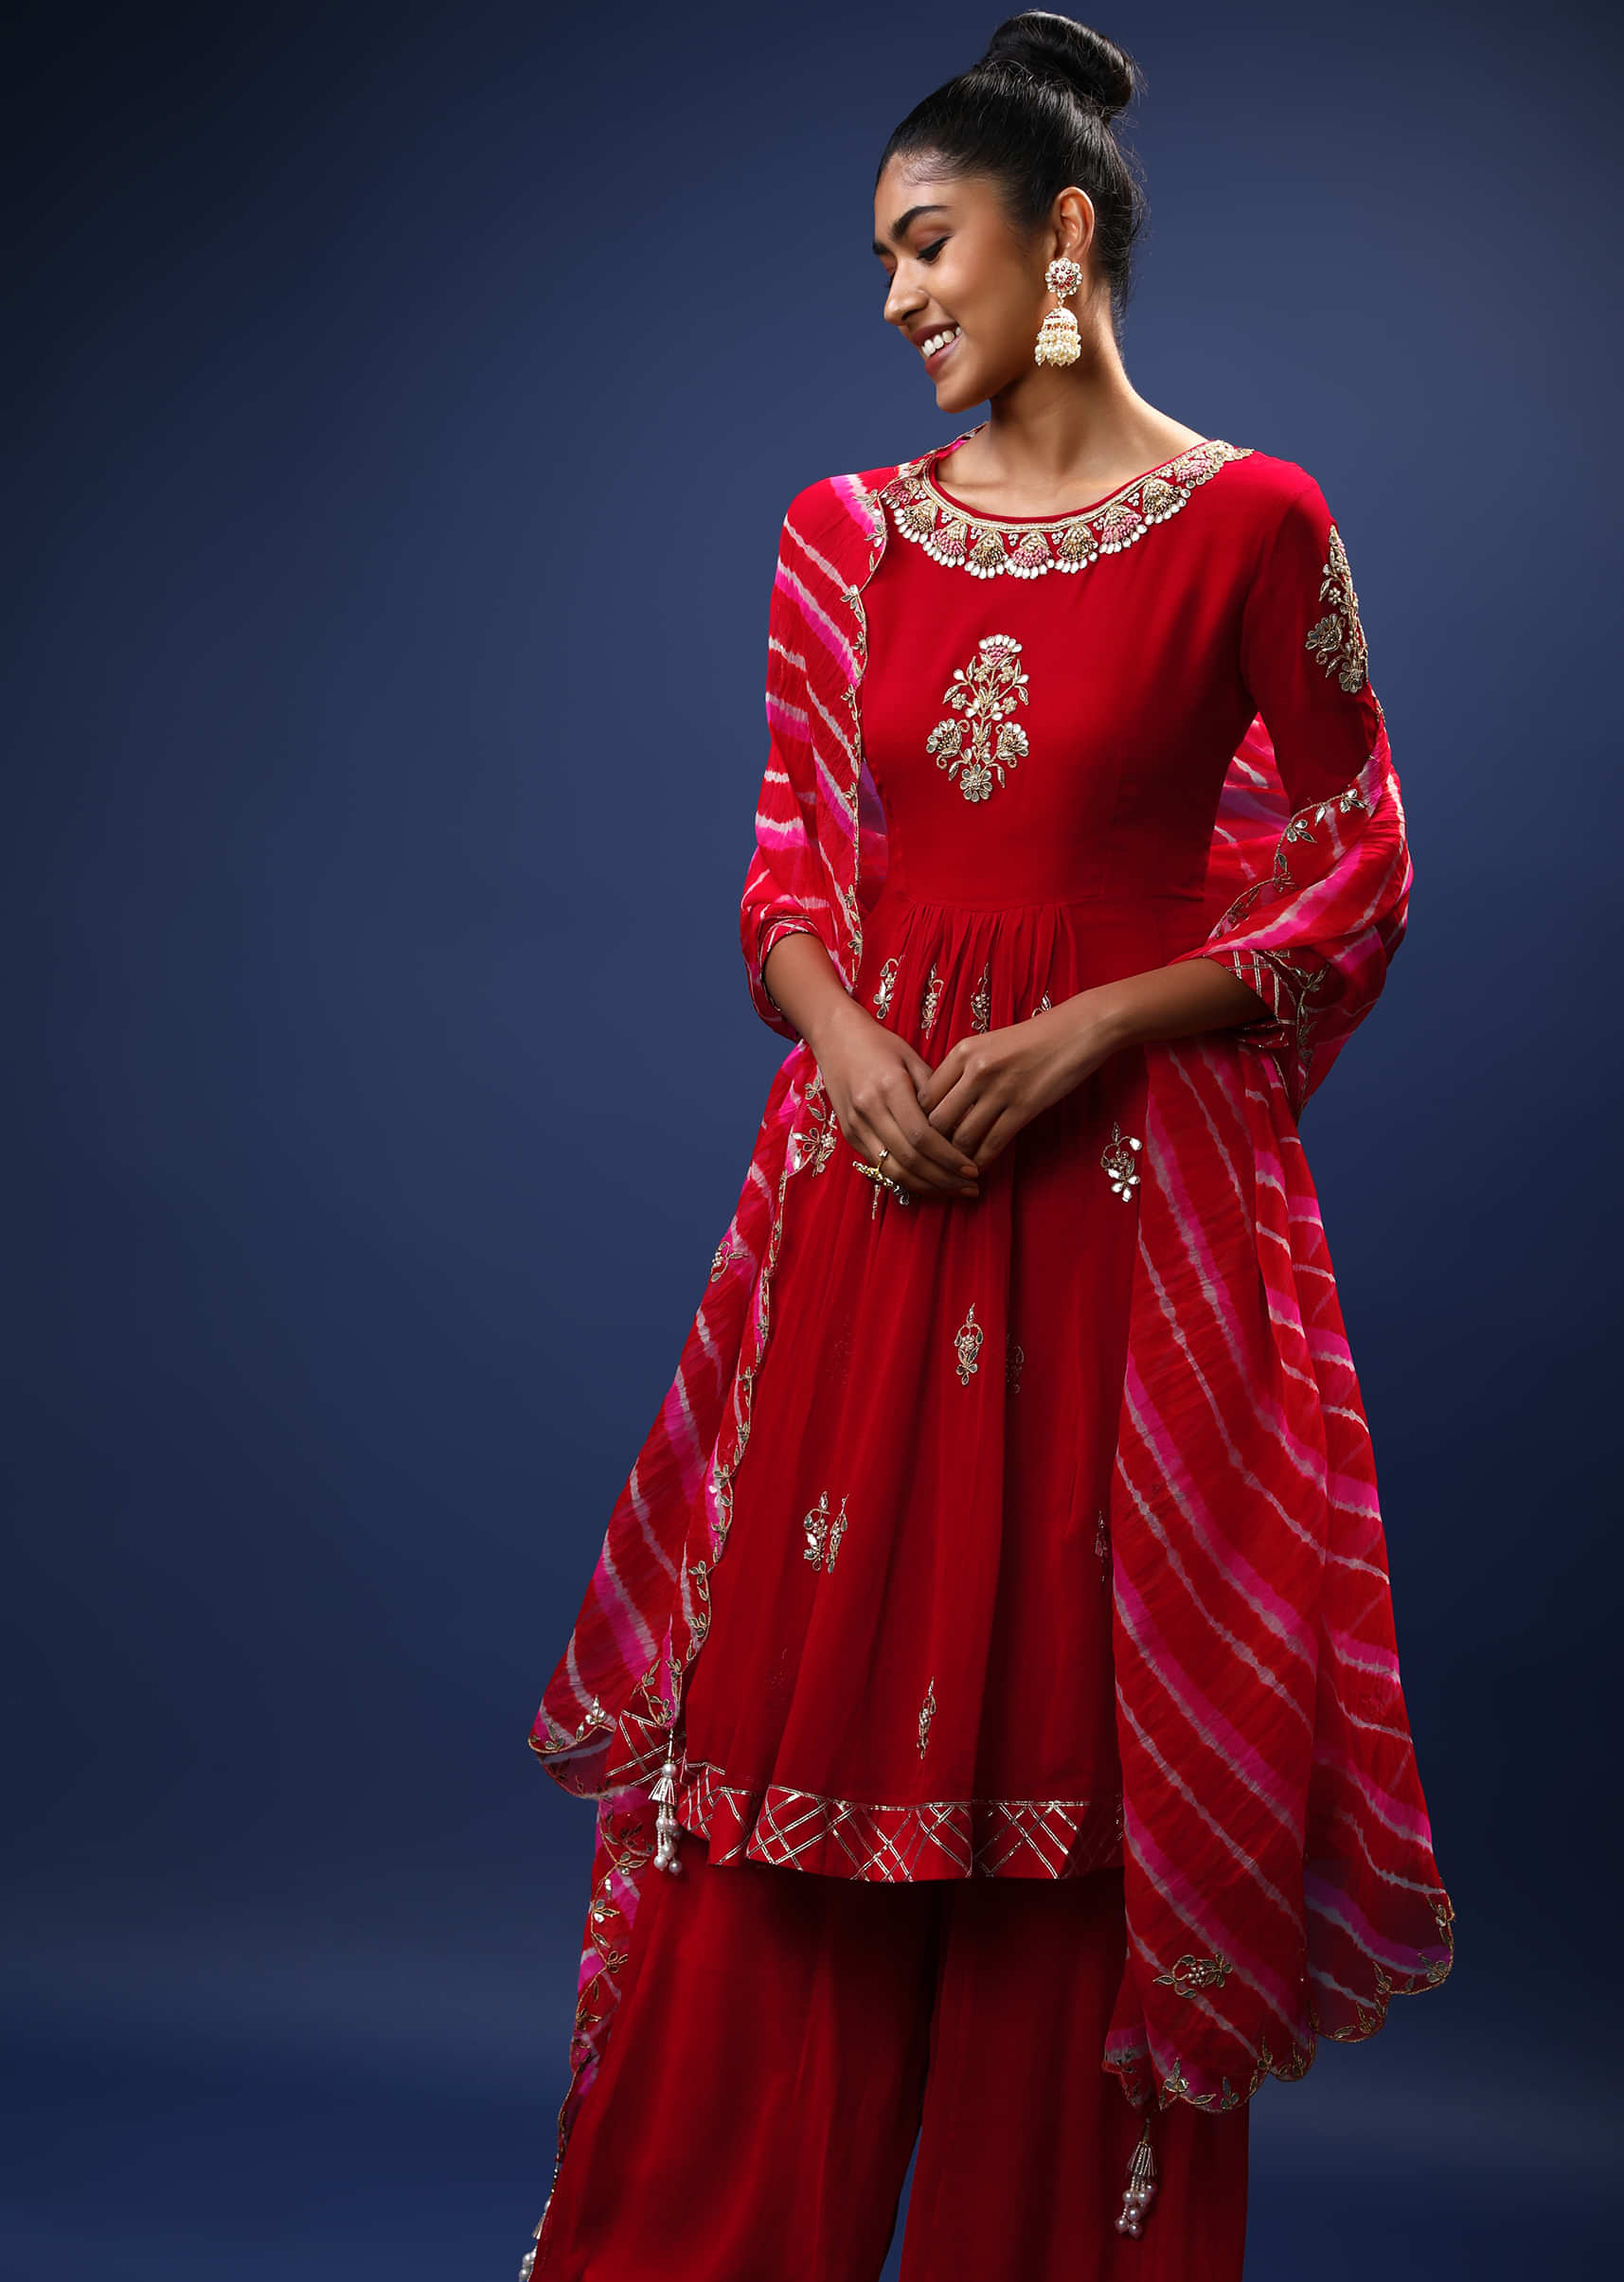 Red Palazzo Suit With A Lehariya Dupatta And Flared Kurti Adorned In Gotta Patti And Zardosi Work In Floral Butti Design  